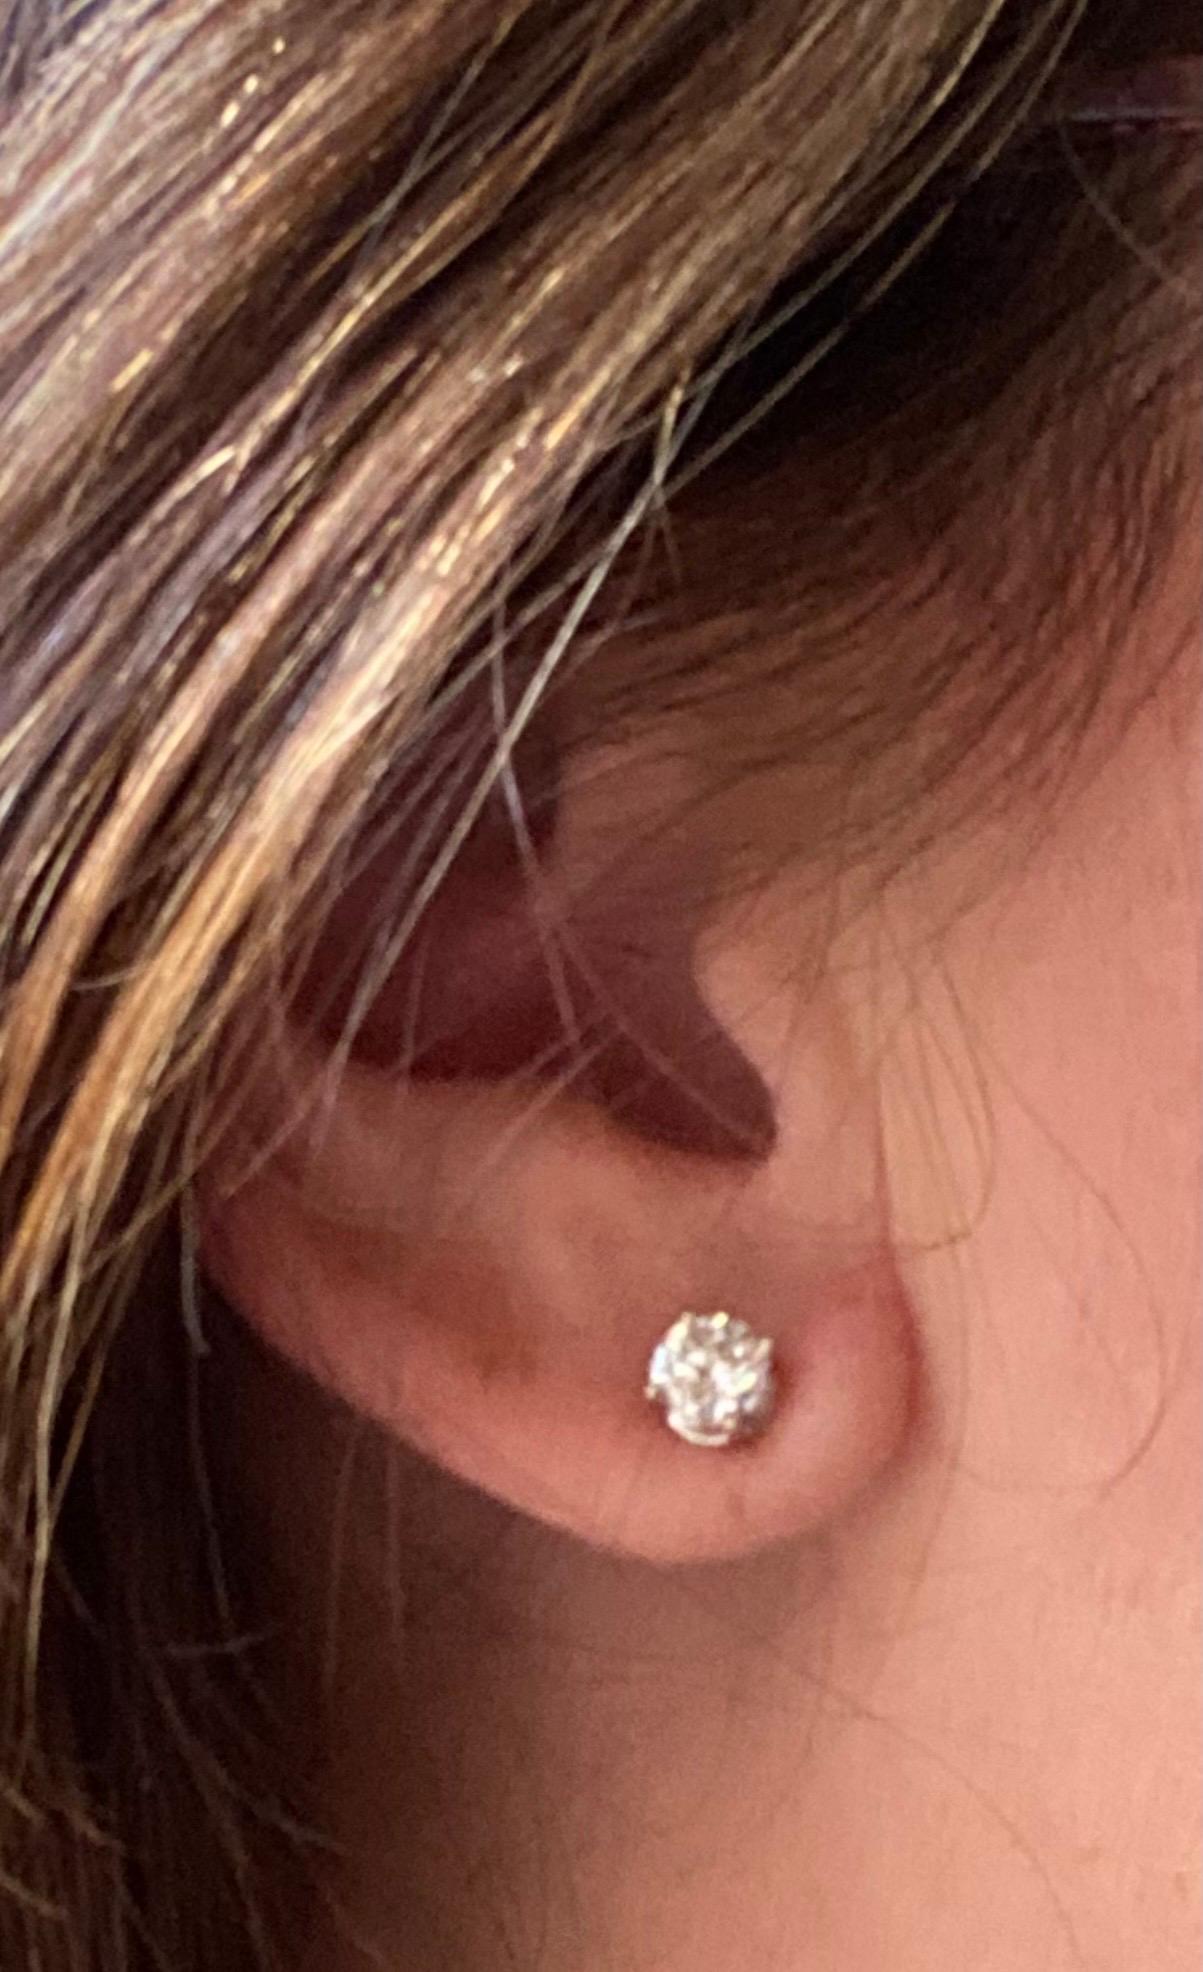 Perfect size and extremely brilliant, these lovely Diamond studs set in 14kt White Gold one is 0.72ct E Color (colorless) and the other is 0.74ct F Color (colorless) and SI Clarity (slightly included). These are new and ready to ship. Comes with an